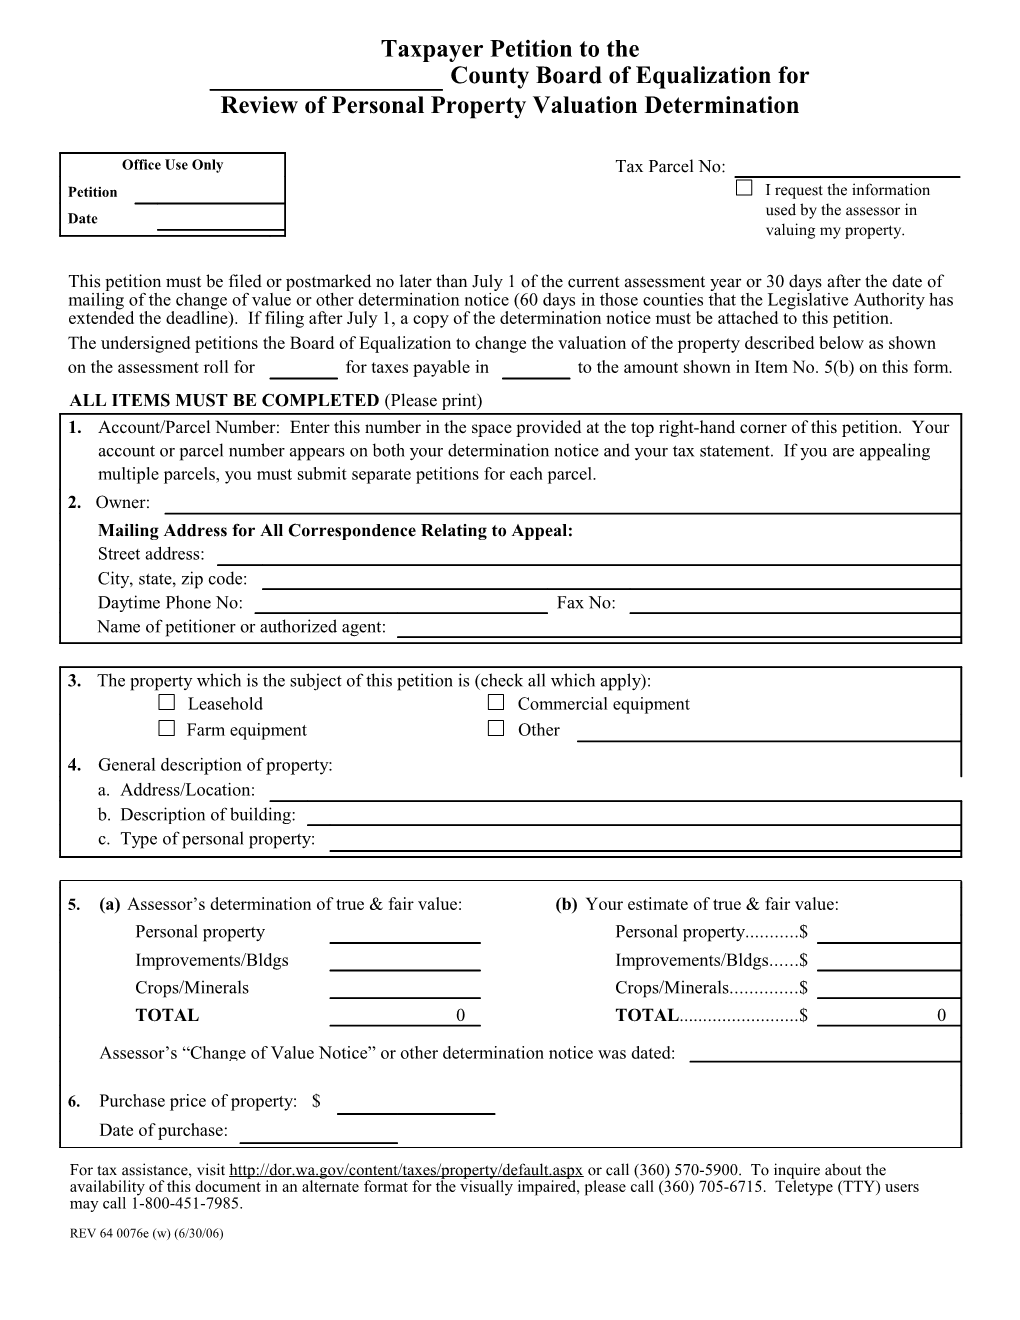 Taxpayer Petition to the County Board of Equalization for Review of Personal Property Valuation